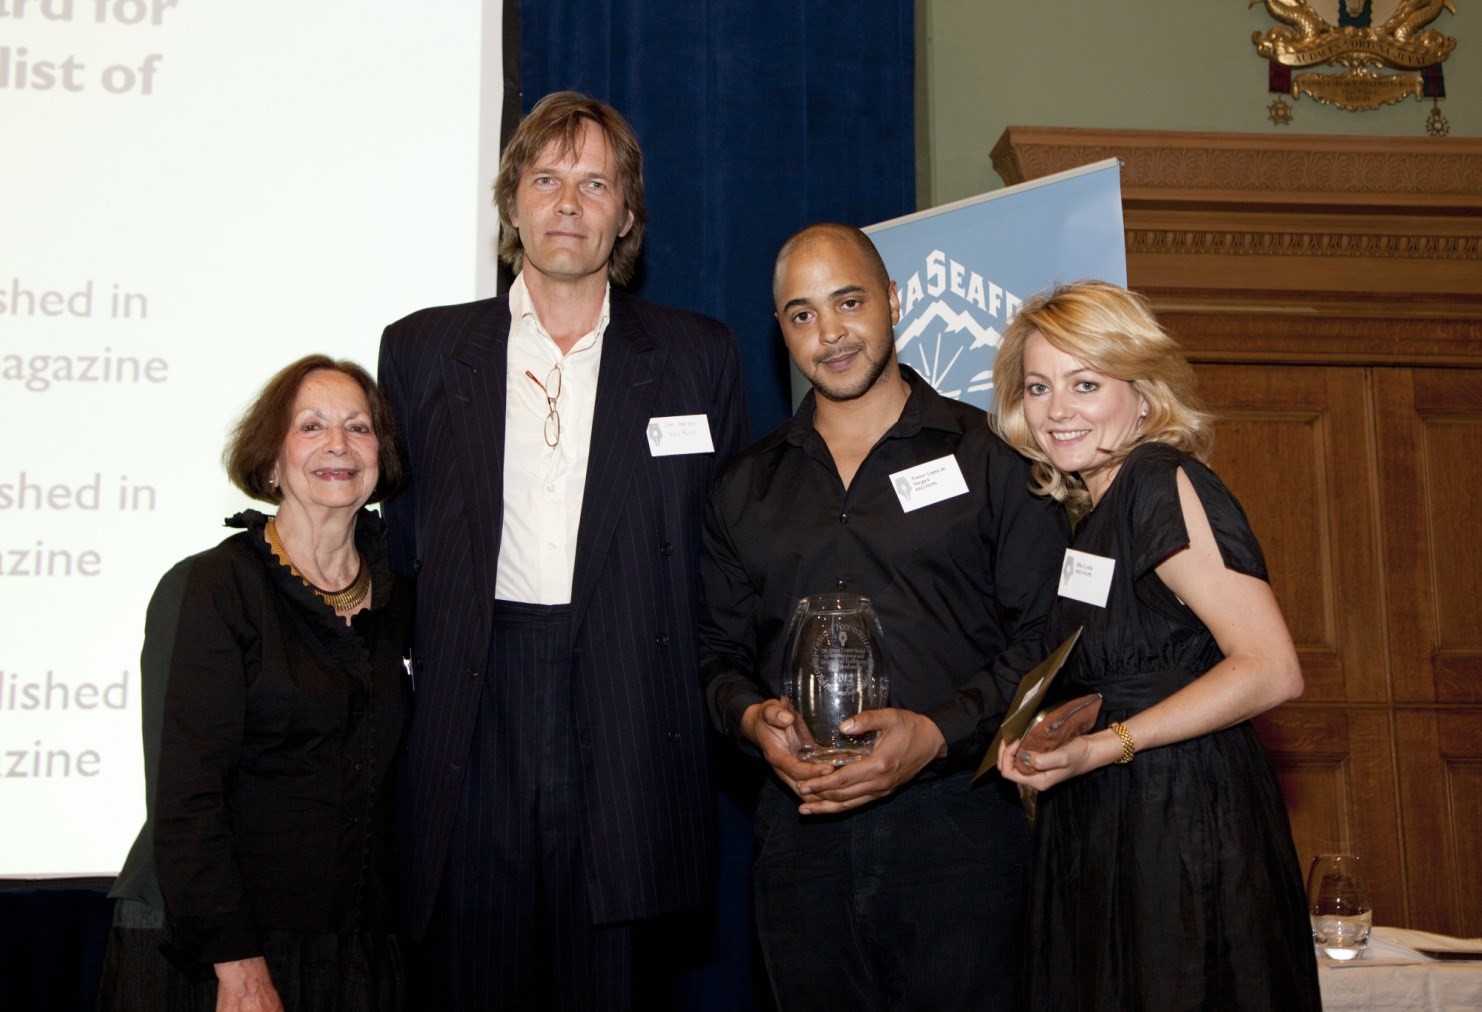 Claudia Roden presenting the Derek Cooper Award for Campaigning and Investigative Food Writing and Broadcasting to from left to right: Zam Baring, Trevor Lopez de Vergara and Ella Cosby from Keo Films